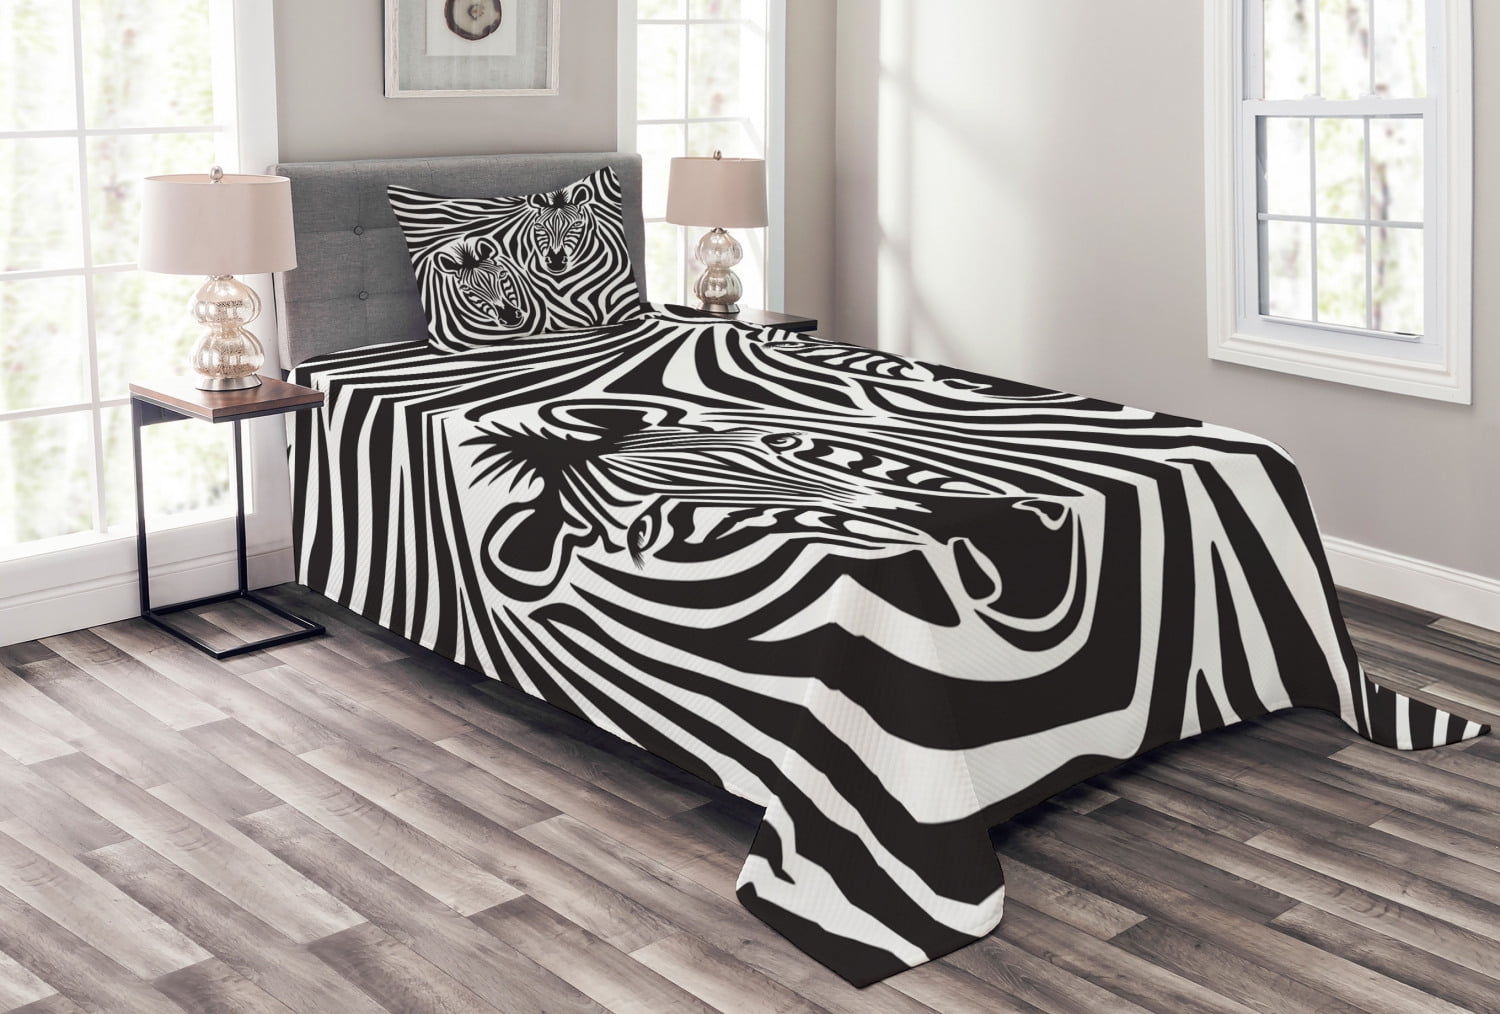 Hunt Zebra Tribe Ethnic Print Details about   Animal Quilted Bedspread & Pillow Shams Set 